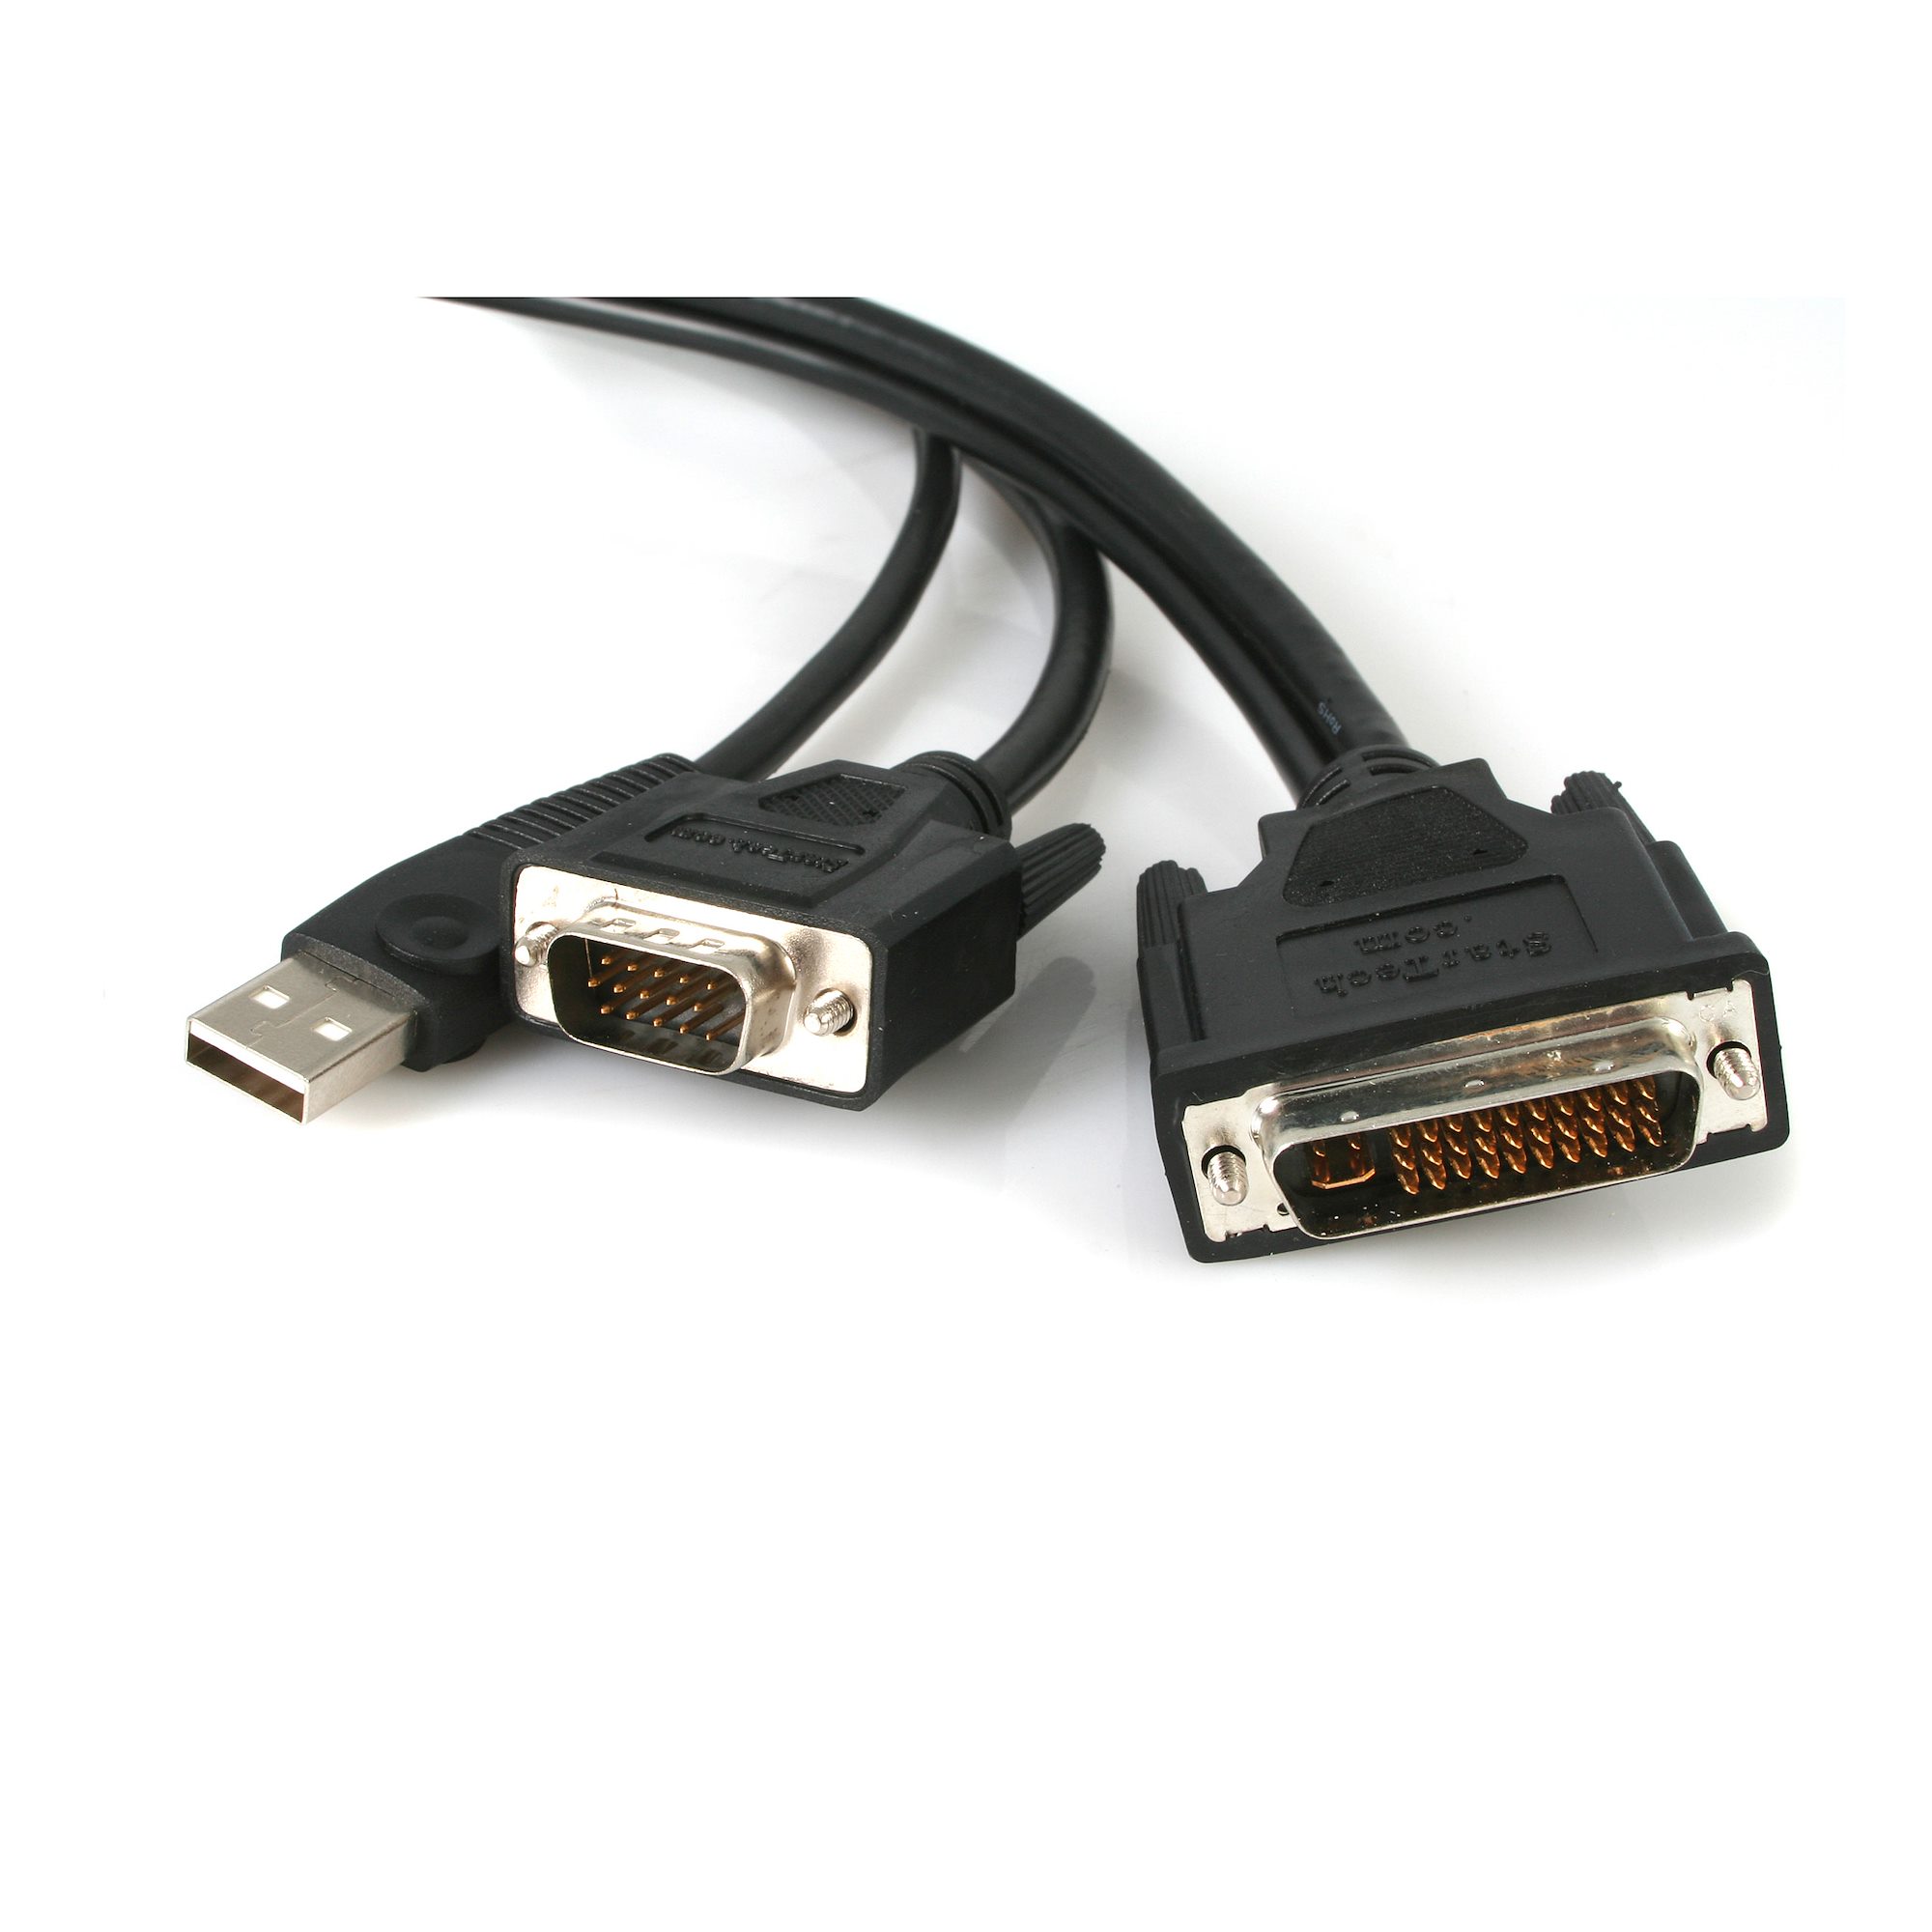 M1 to VGA Projector Cable with USB - Video Cable Adapters | StarTech.com